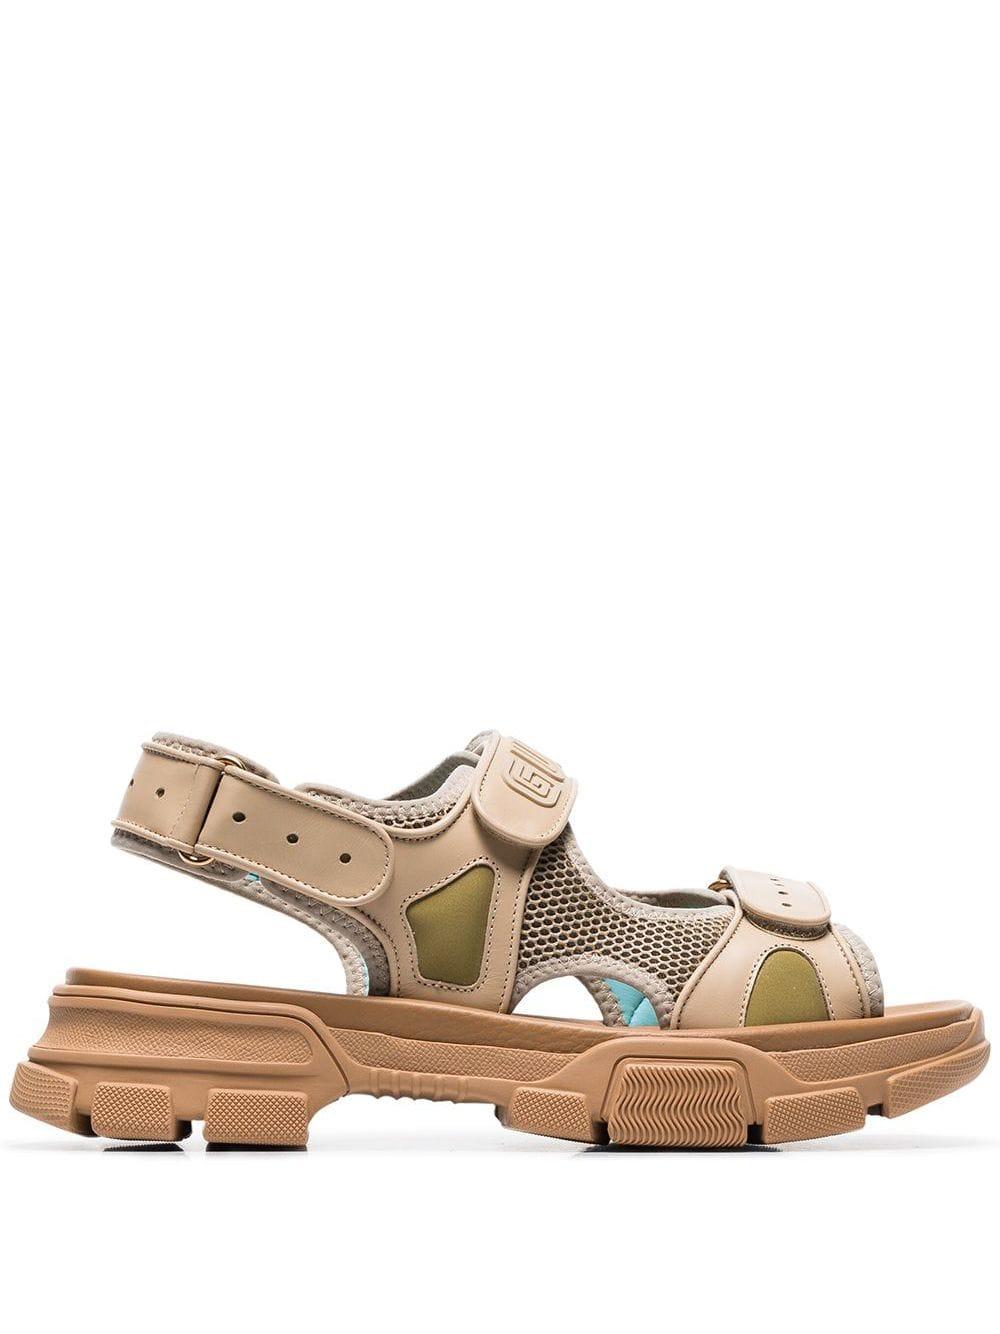 Gucci Brown Aguru Leather And Mesh Hiking Sandals for Men - Lyst